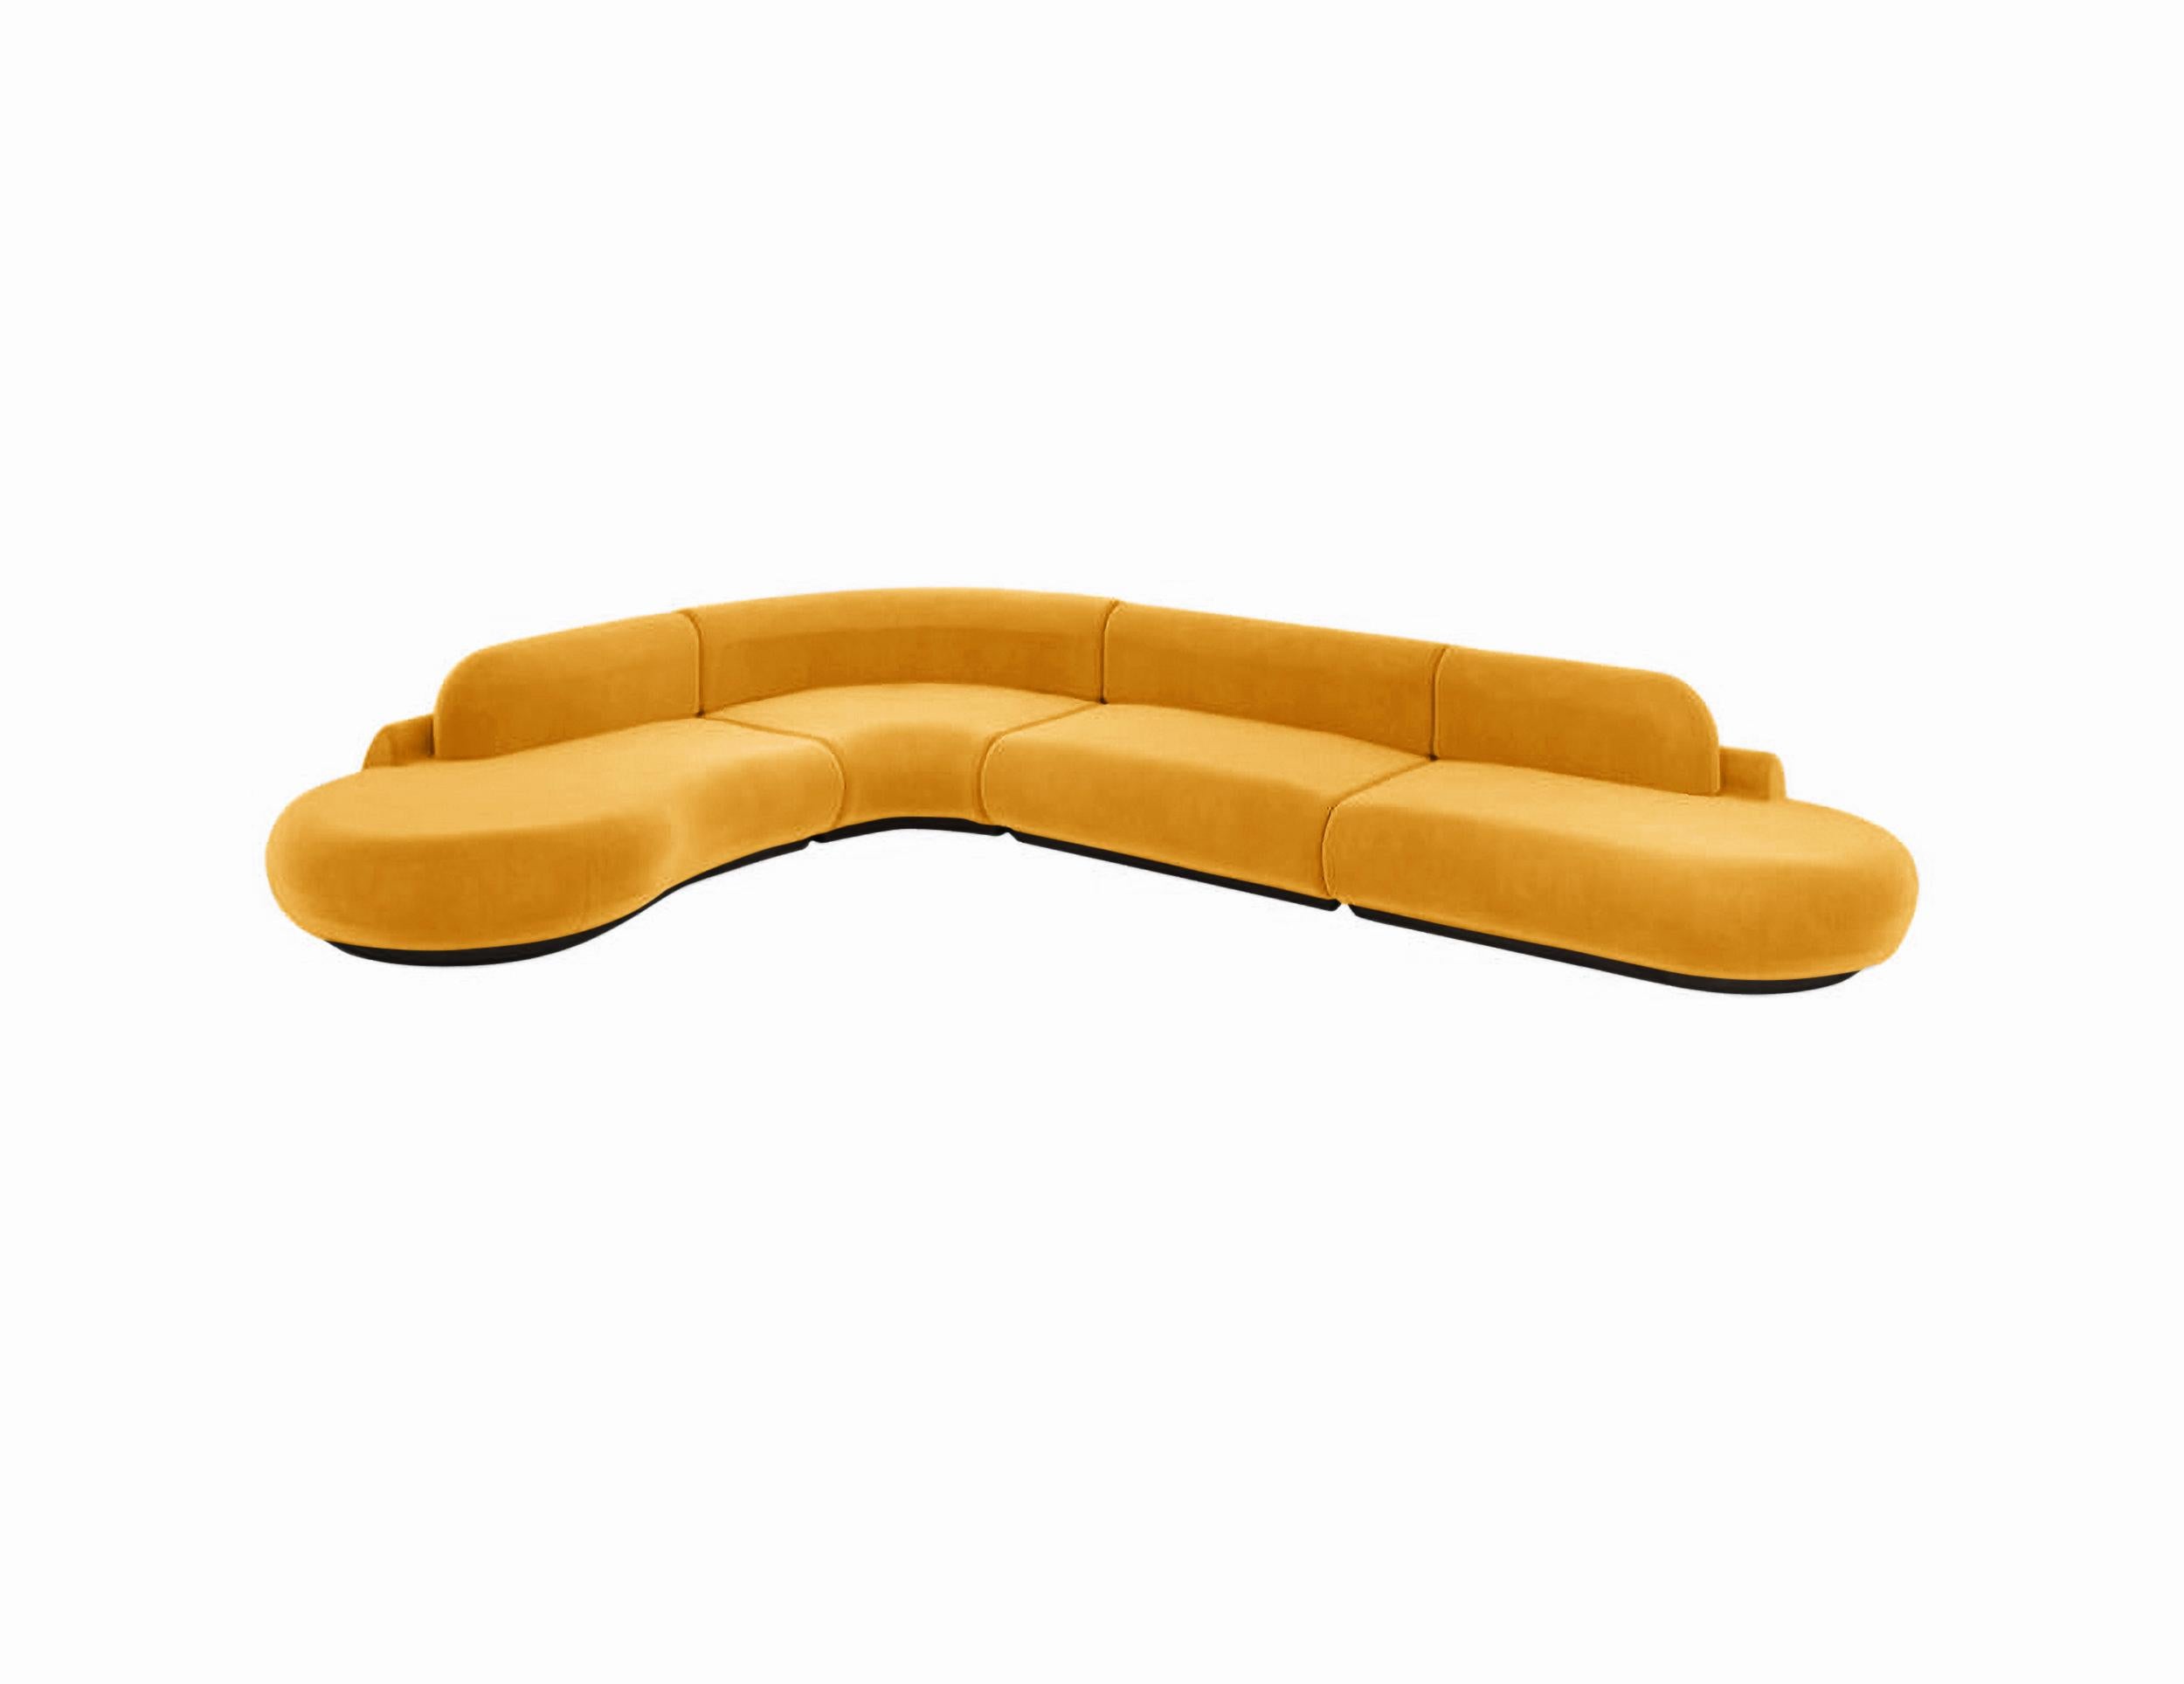 Naked Curved Sectional Sofa, 4 Piece with Beech Ash-056-5 and Corn